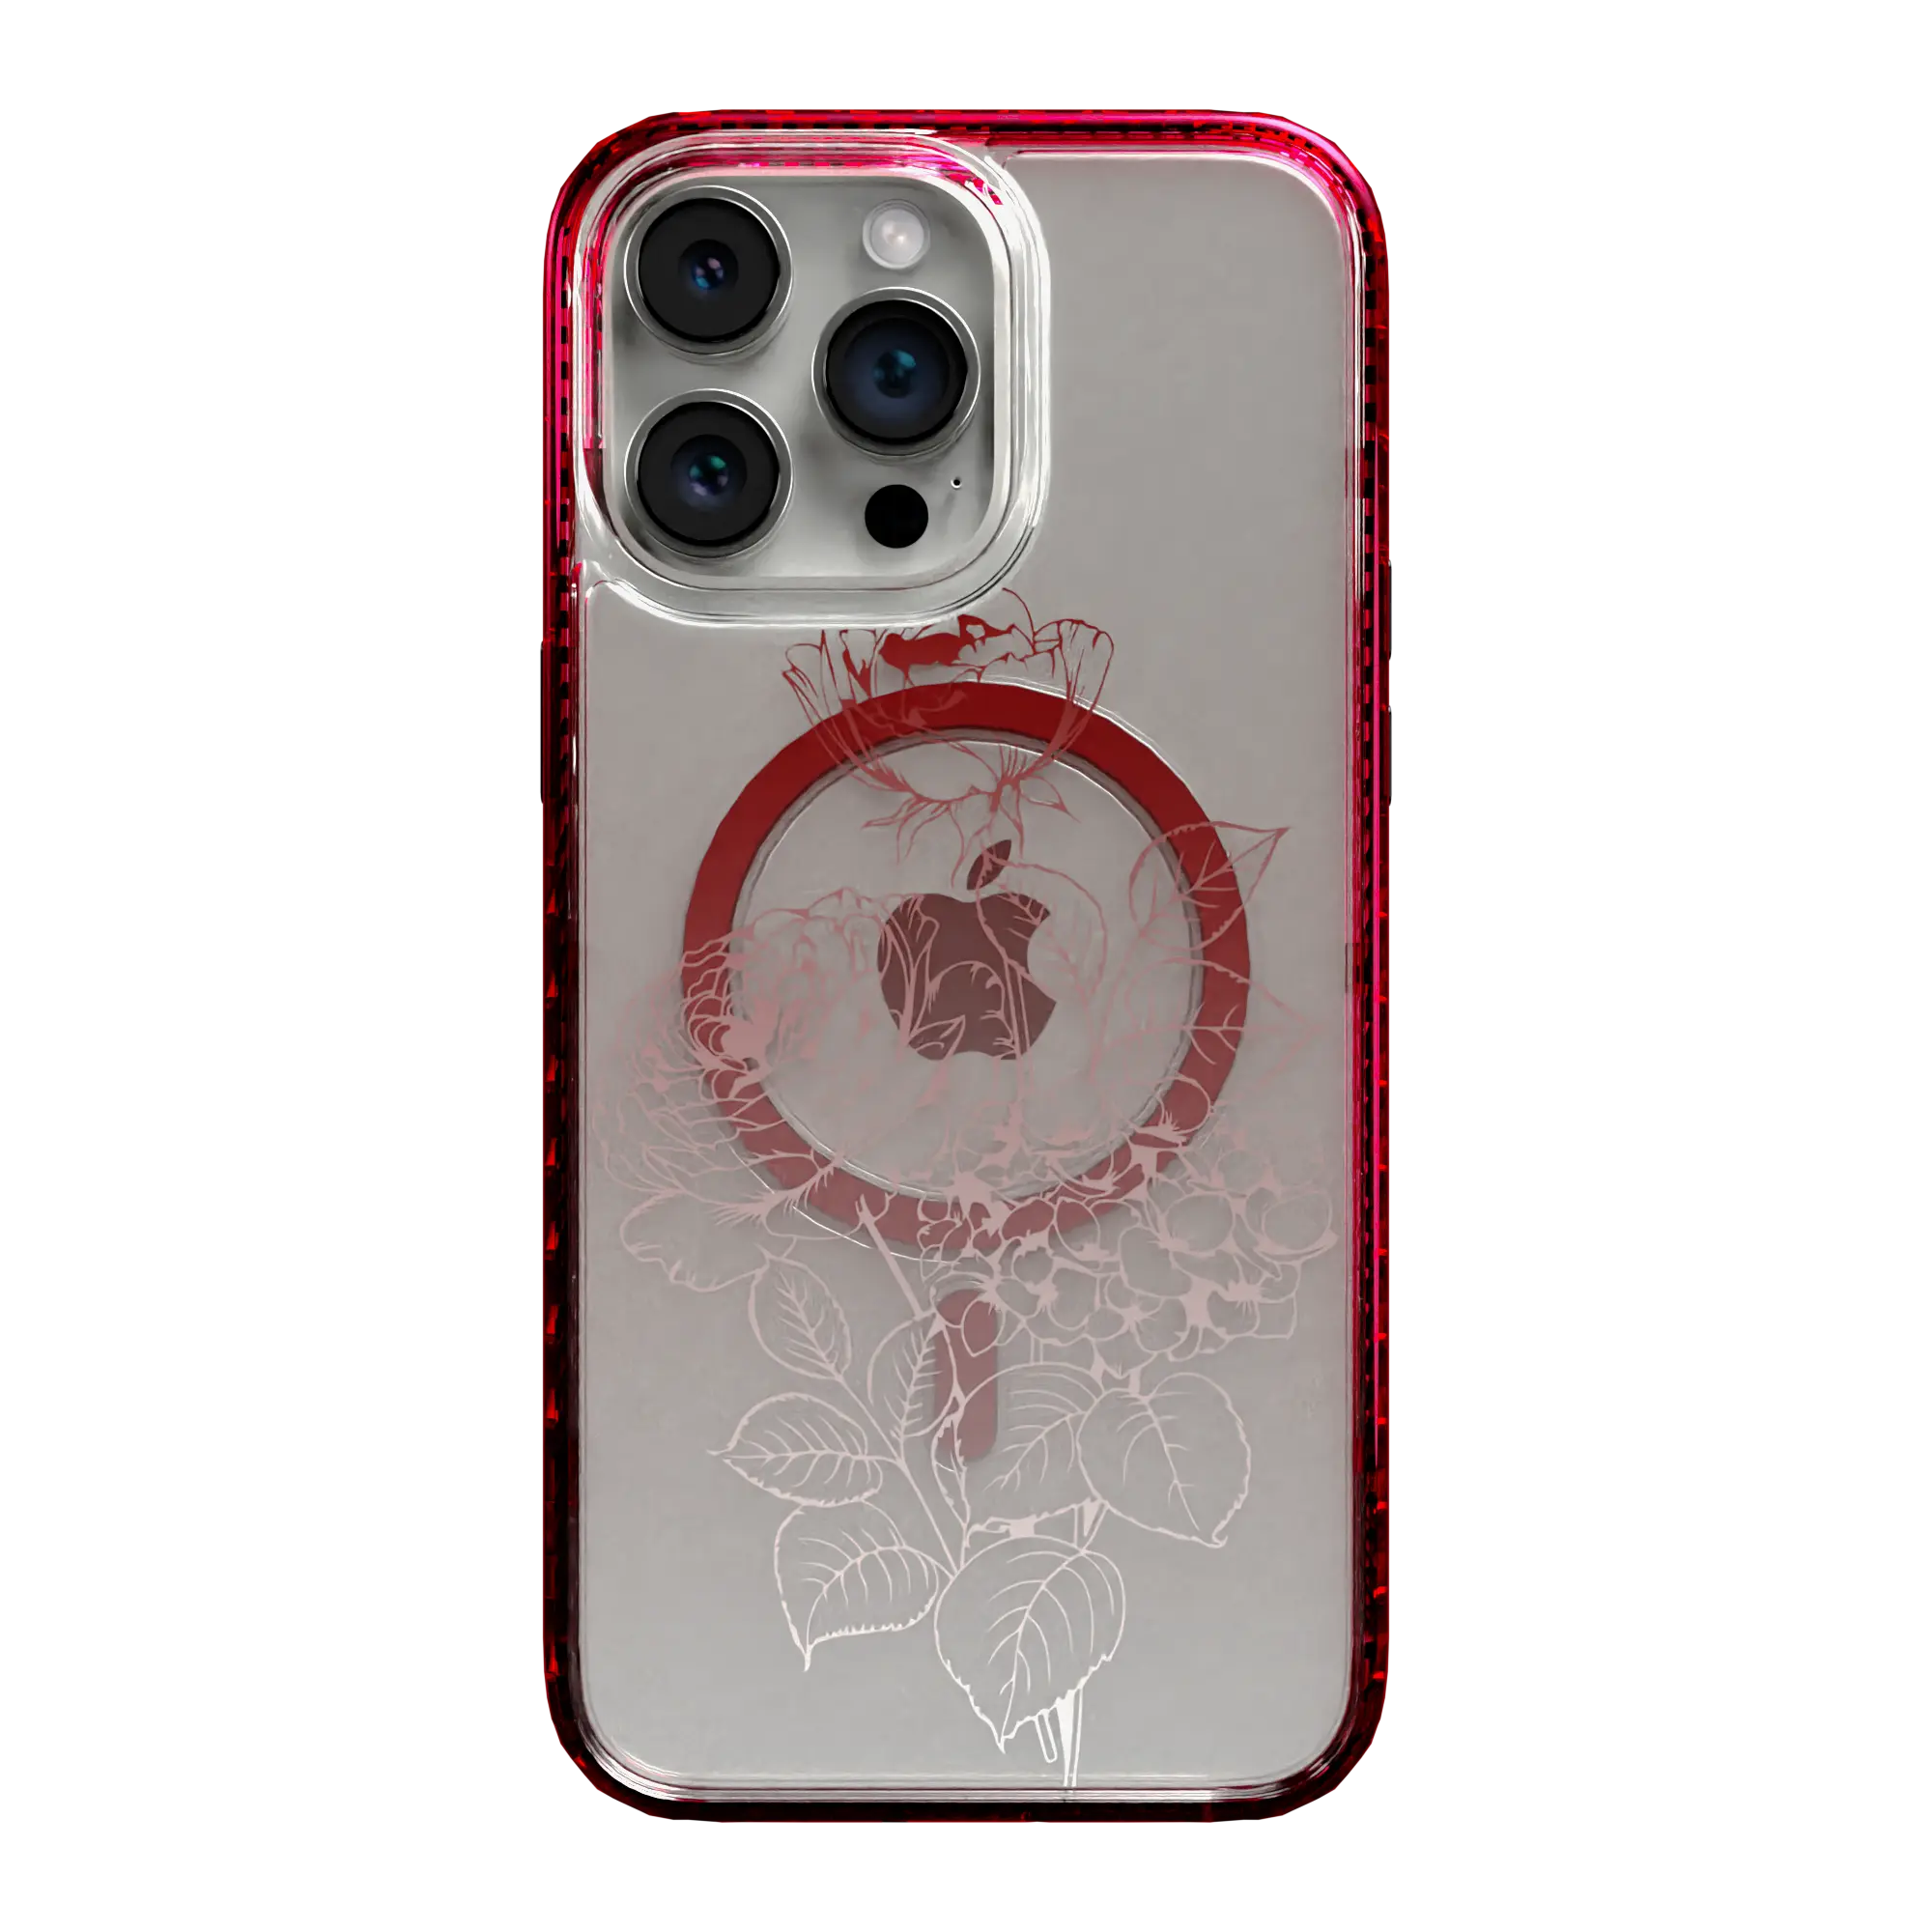 Apple-iPhone-14-Pro-Max-Turbo-Red Rosewood Radiance | Protective MagSafe Case | Ombre Bouquet Collection for Apple iPhone 14 Series cellhelmet cellhelmet